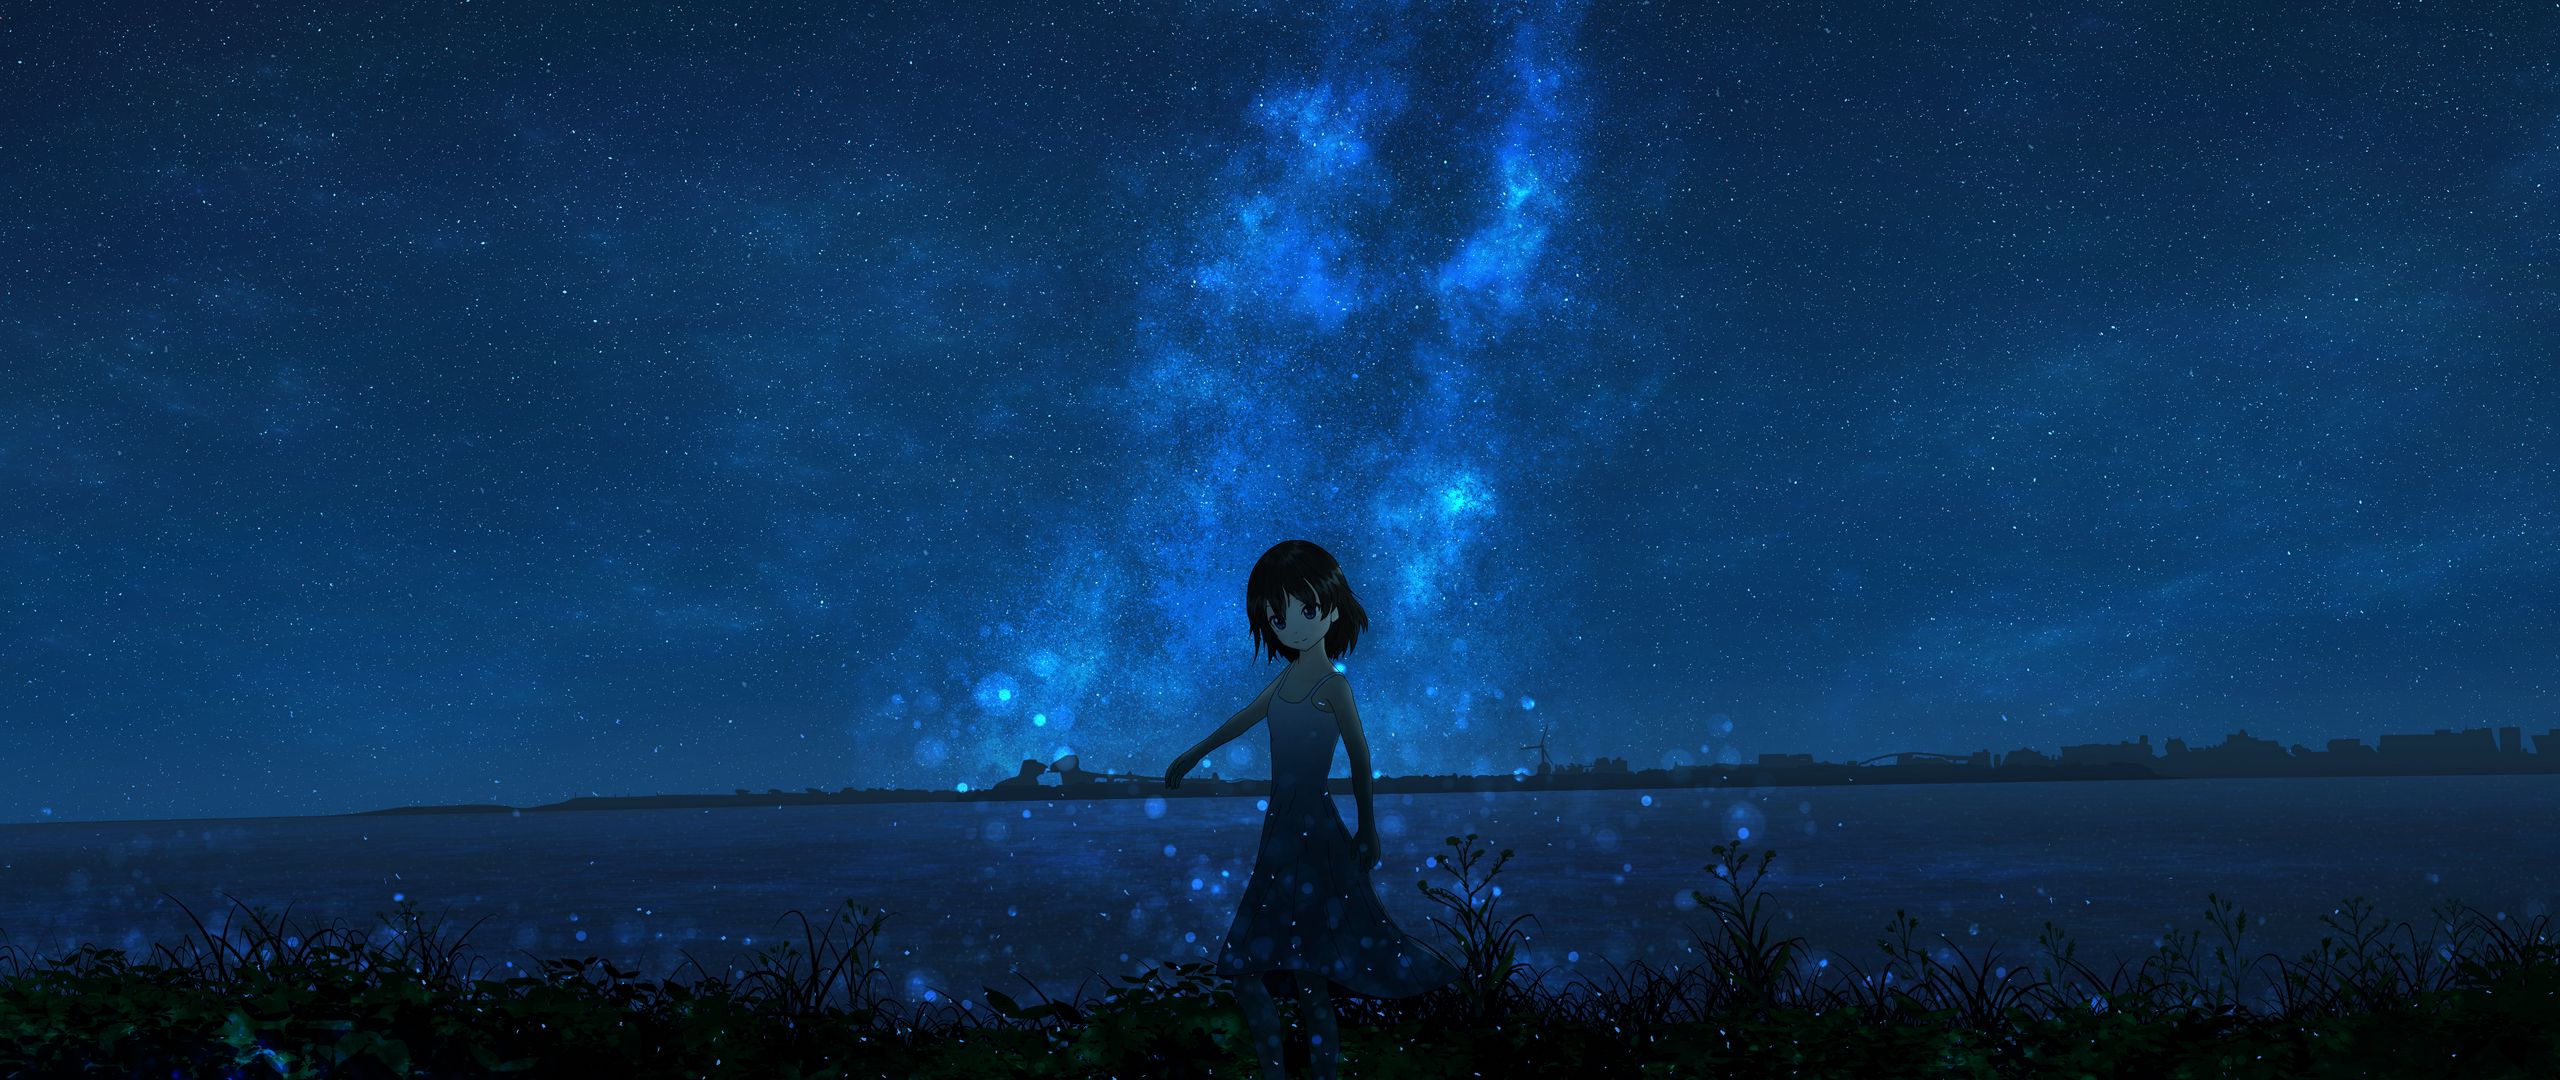 Download wallpaper 2560x1080 girl, night, starry sky, anime dual wide 1080p  hd background